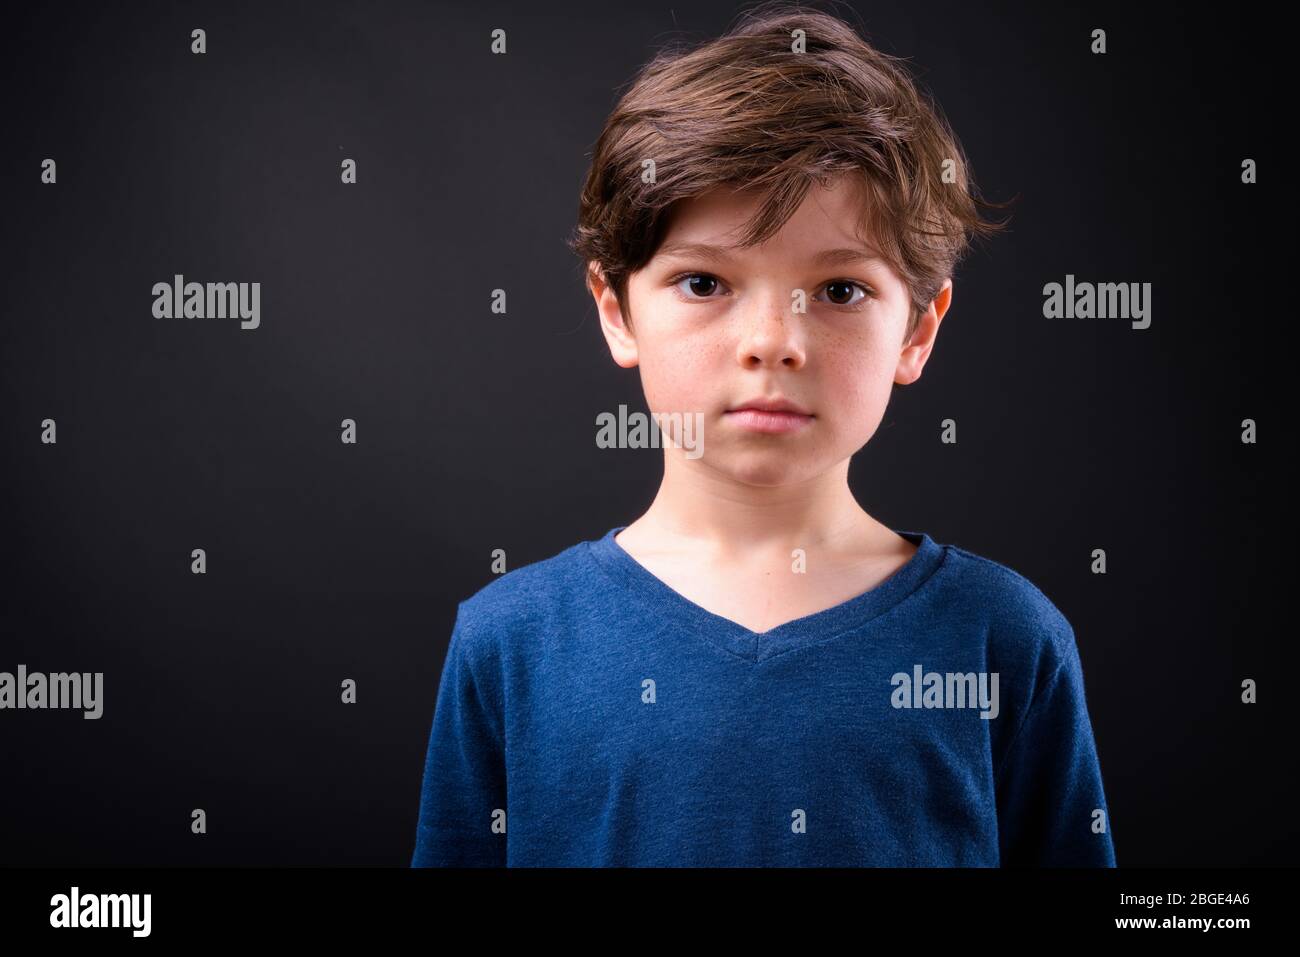 Face of young handsome boy looking at camera Stock Photo